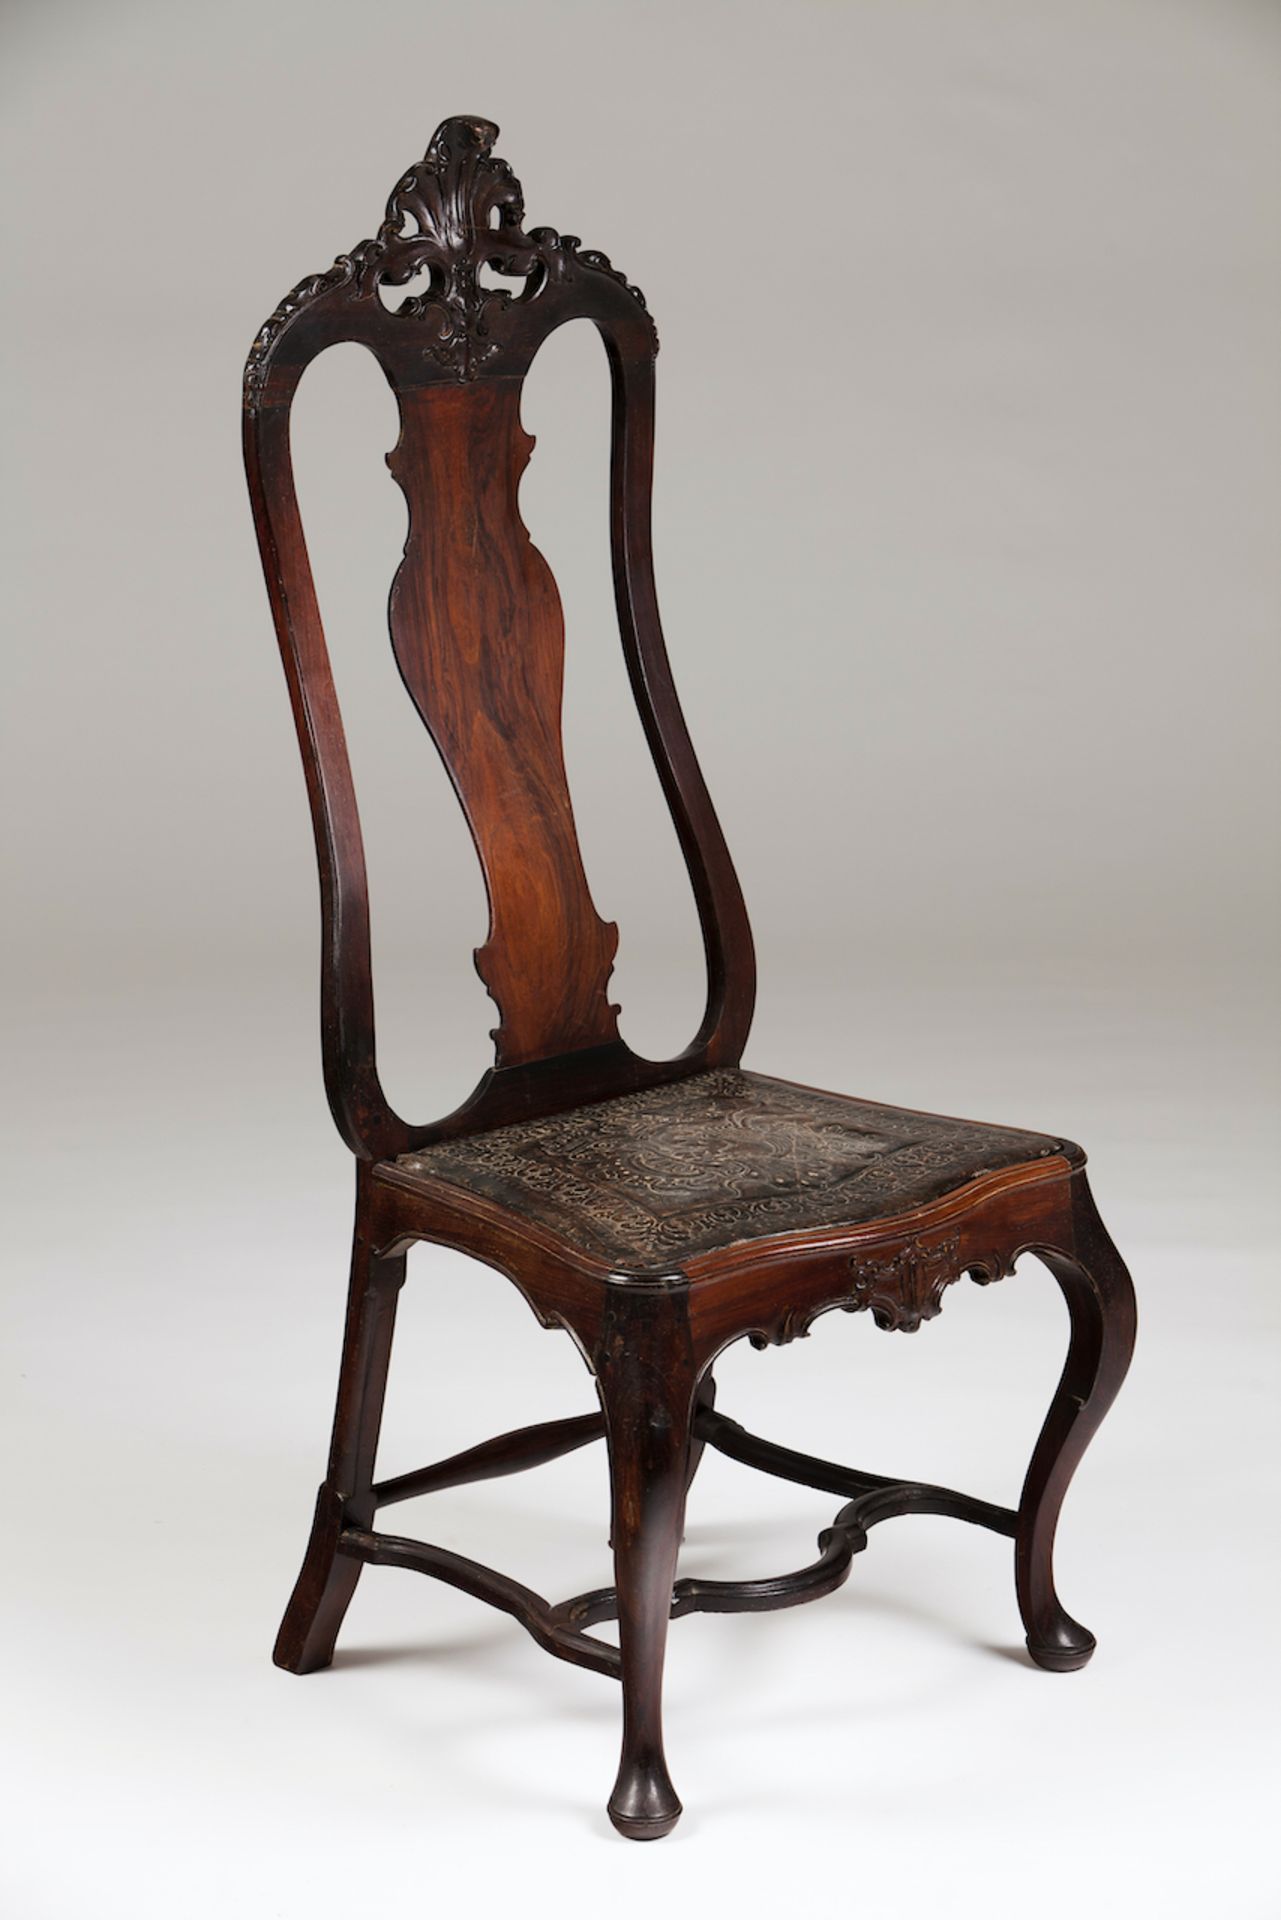 A D.José chairRosewoodCarved decorationScalloped and carved crestLeather seatPortugal, 18th century